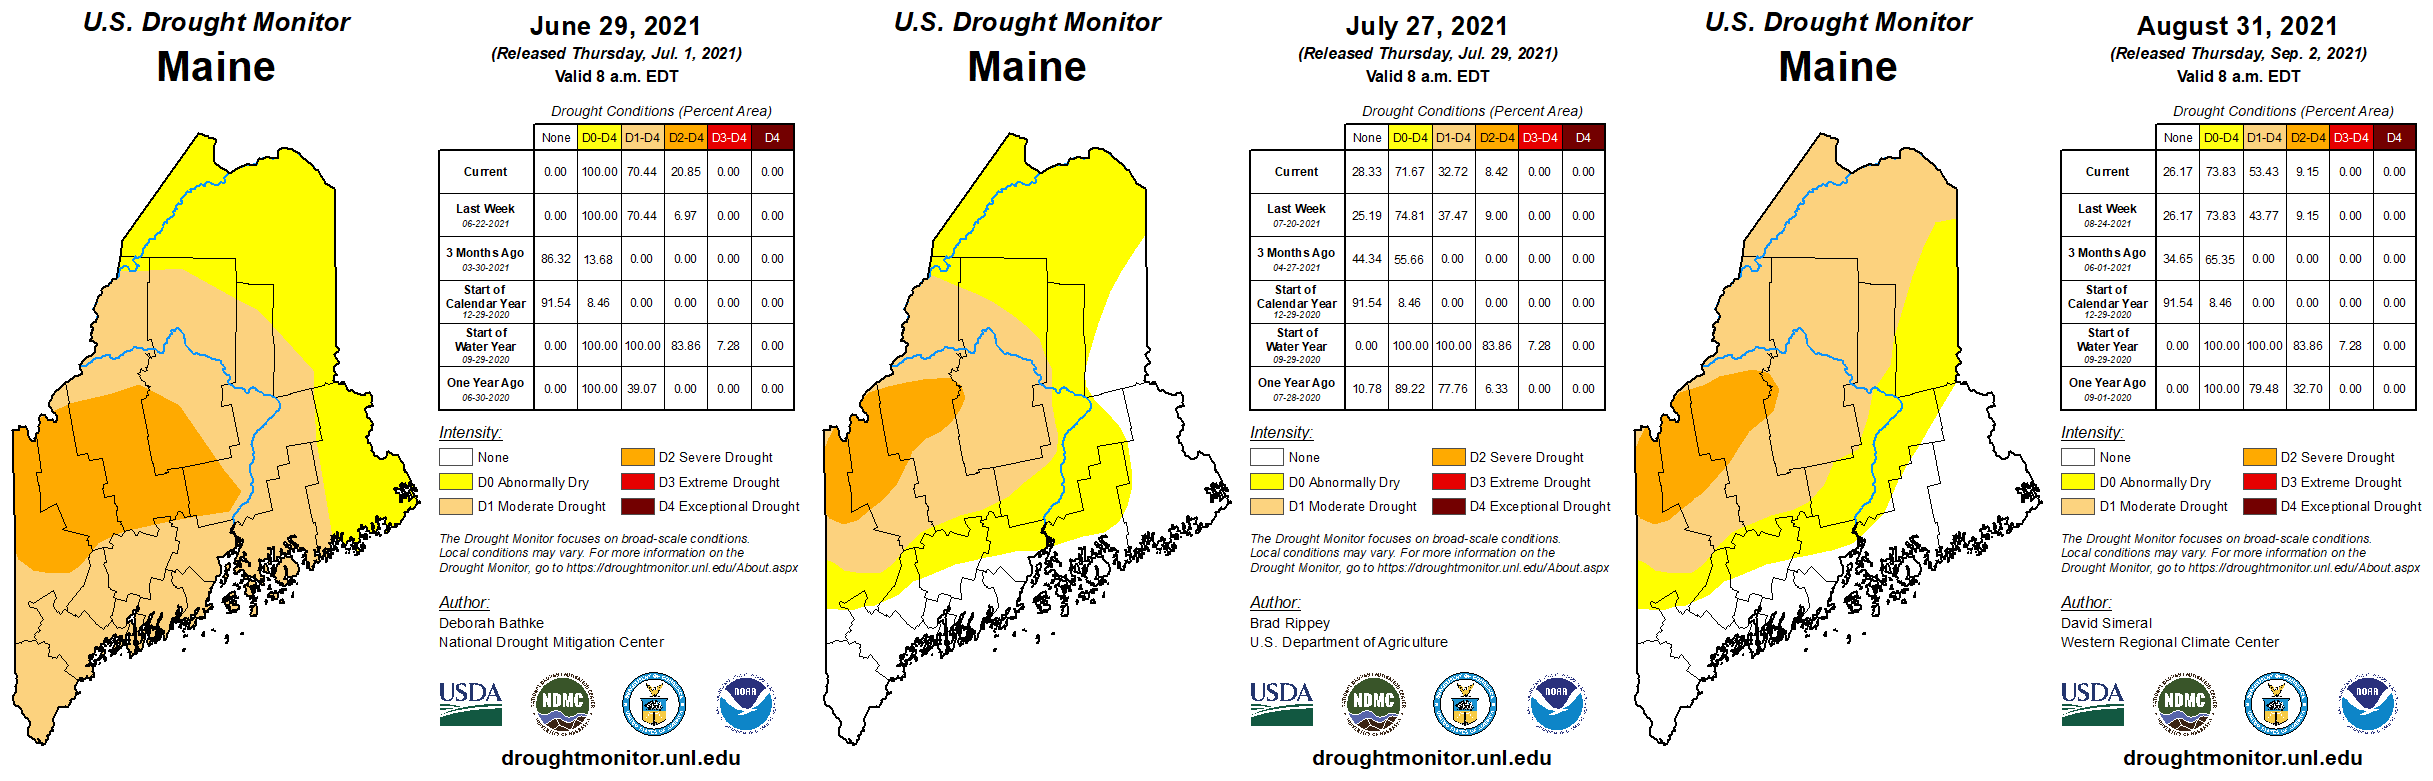 maps of Maine showing drought info for June, July, and August